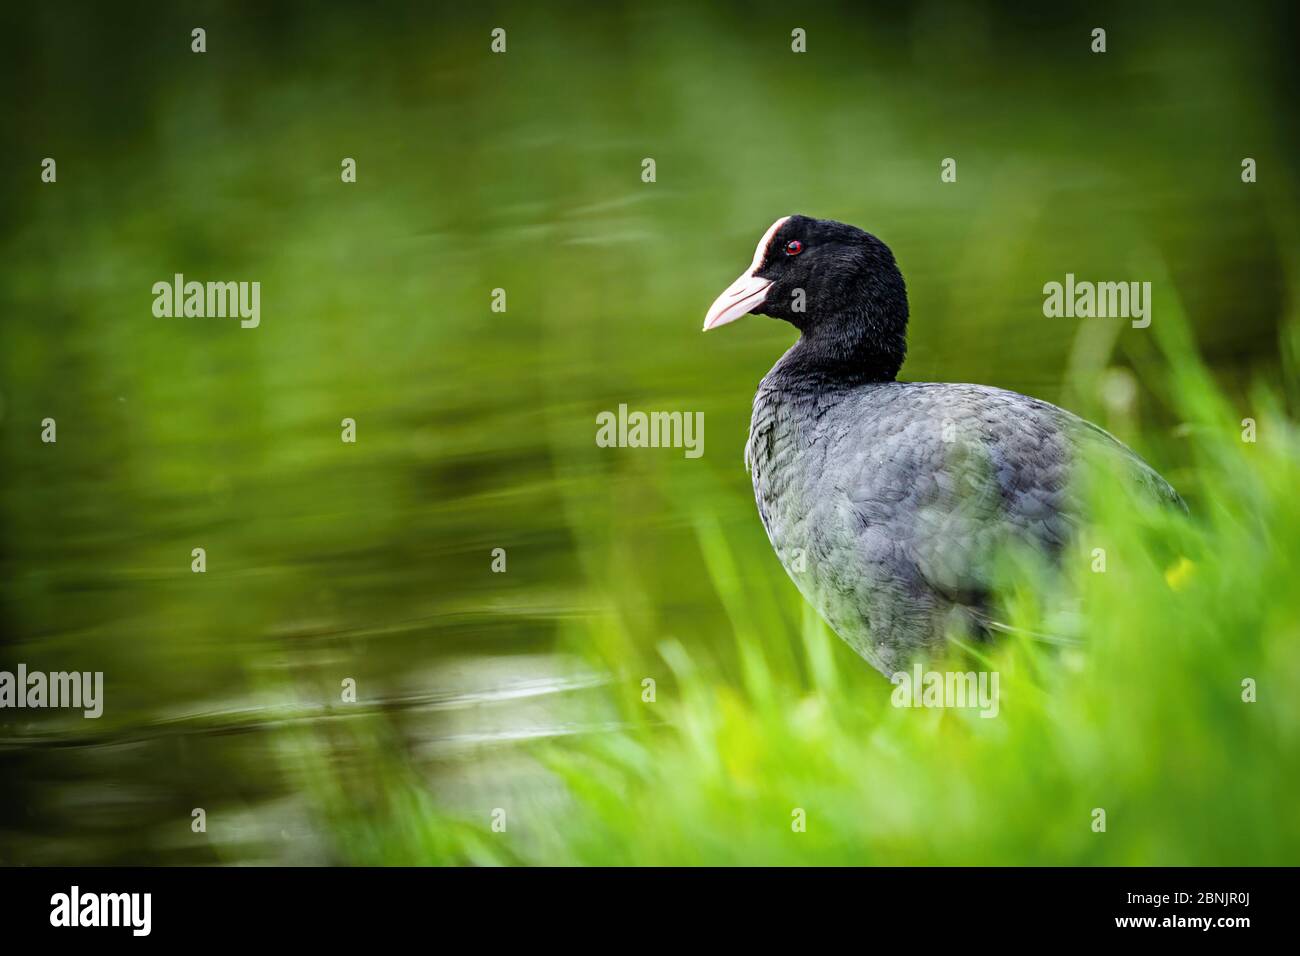 A wild bird, Eurasian coot, with black feathers, white beak and red eye standing on lake shore with fresh green grass. Dark green water. Stock Photo